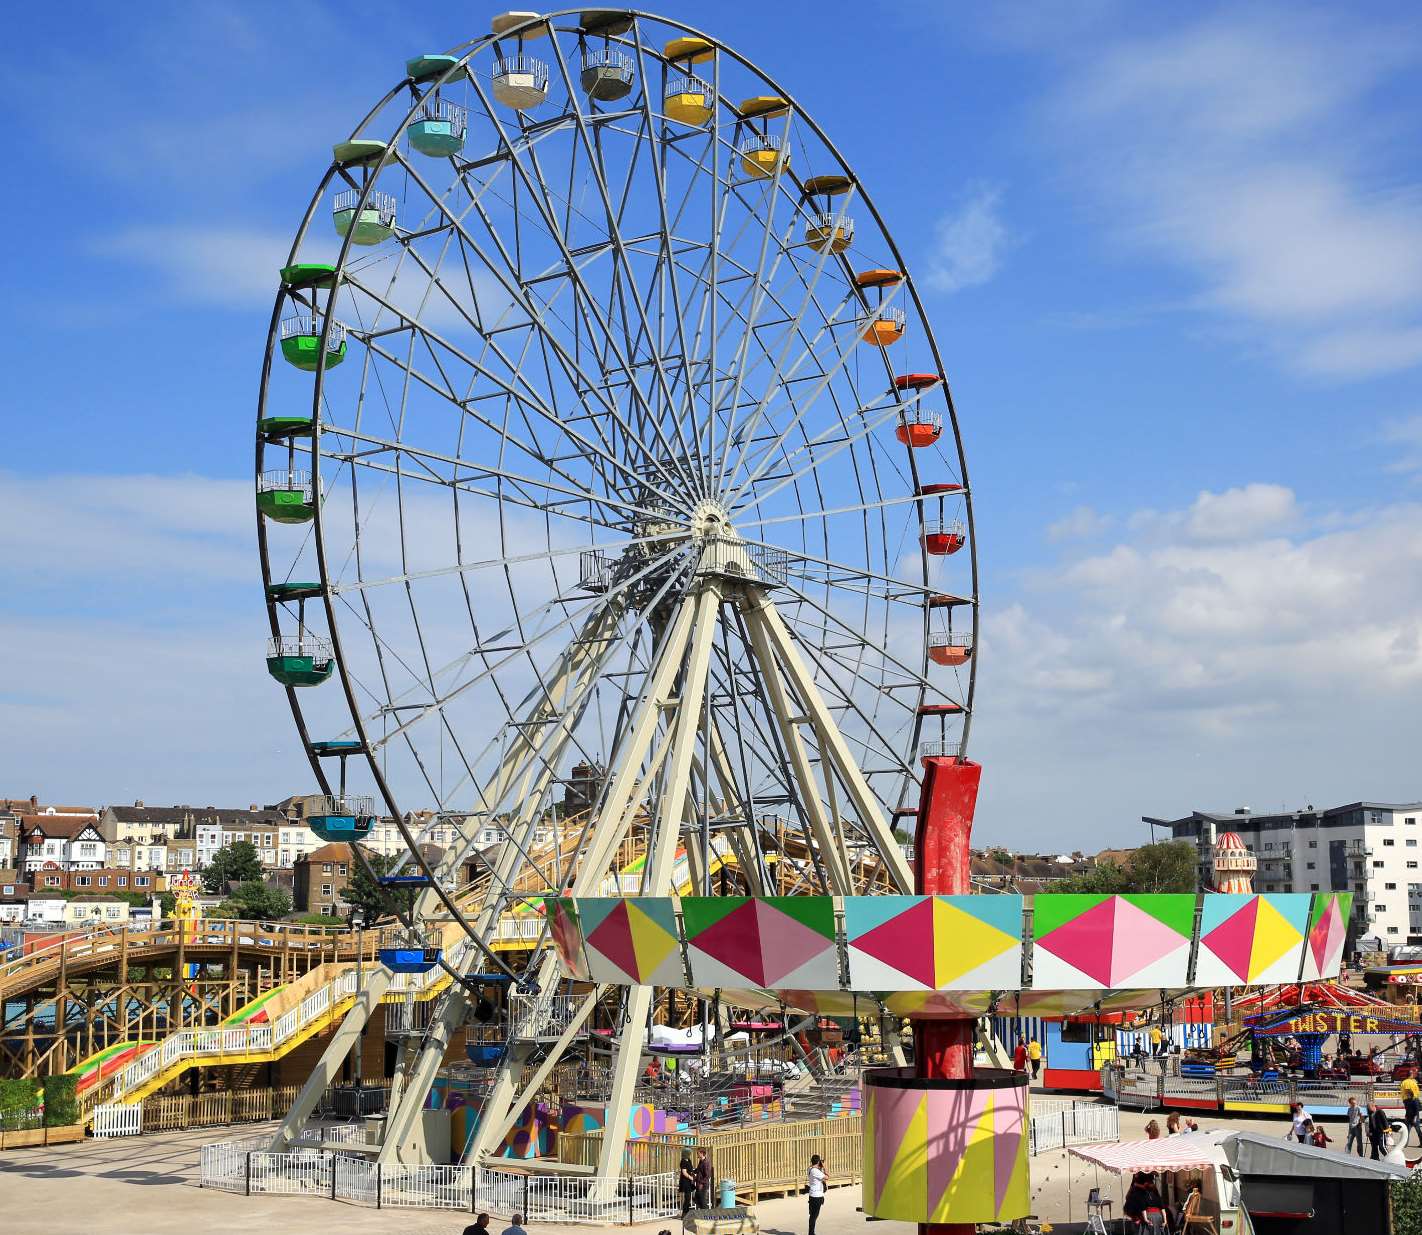 Dreamland Margate welcomes visitors